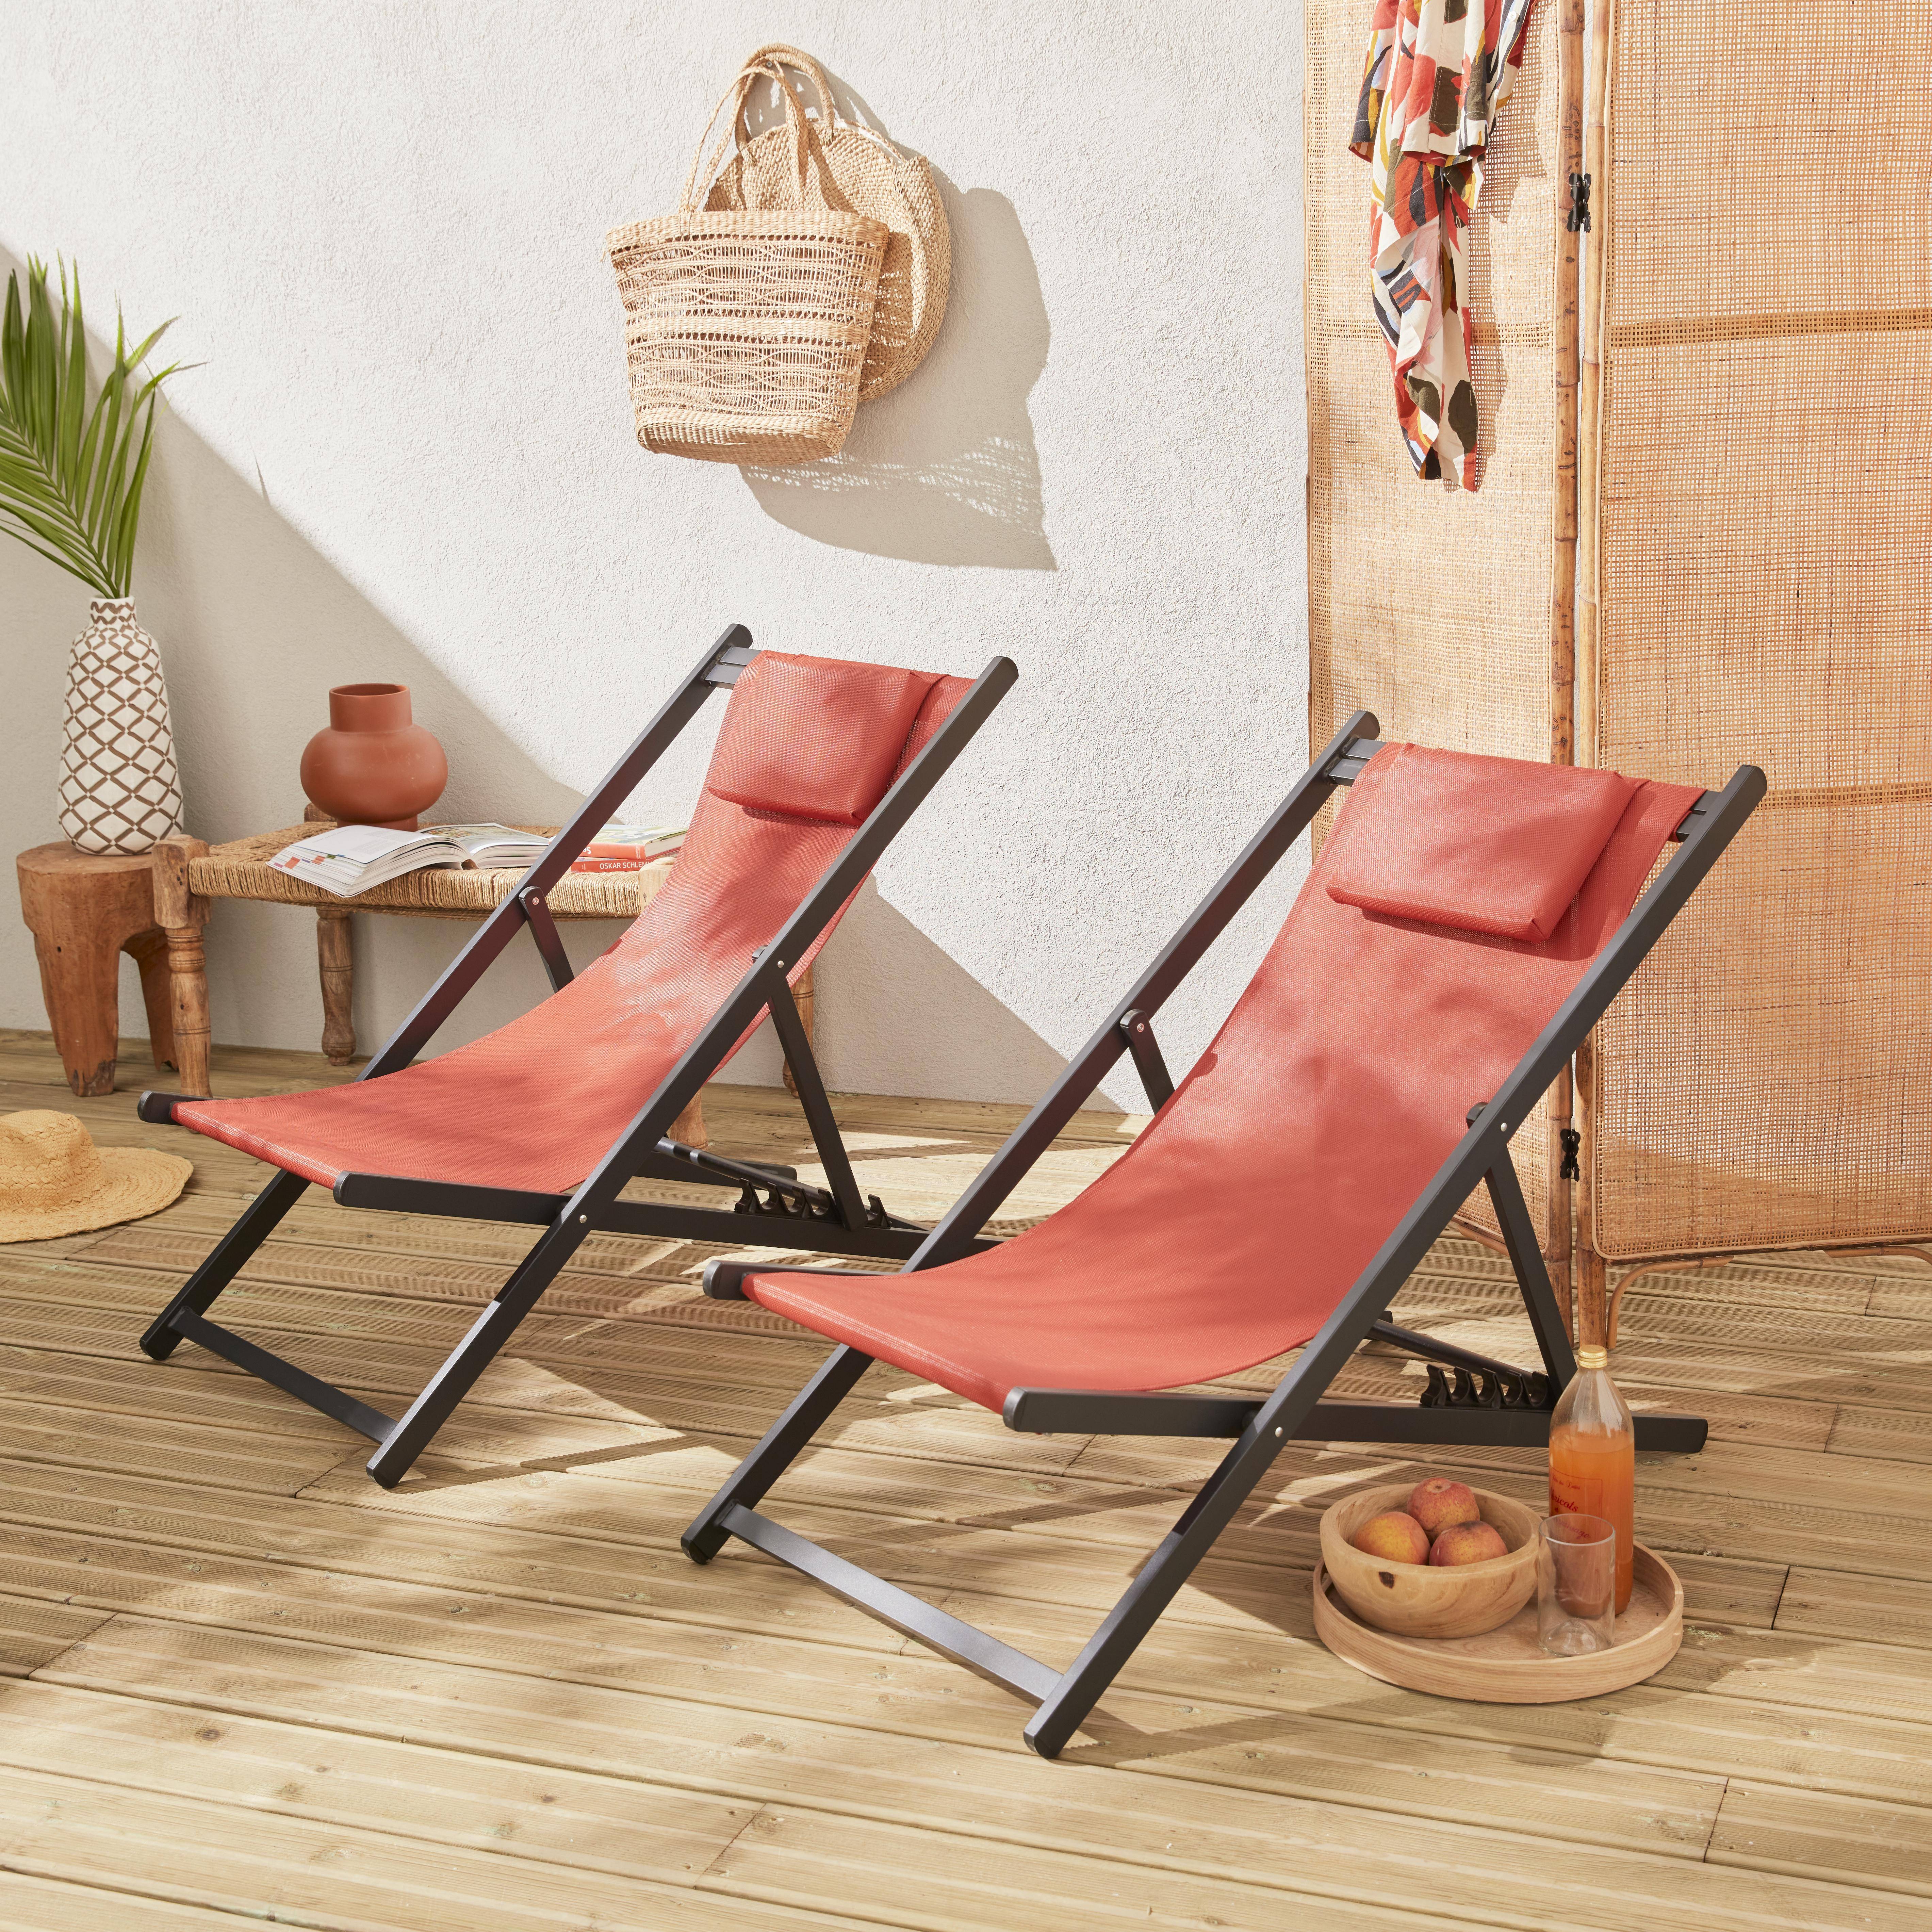 Set of 2 sun loungers - adjustable deck chairs with headrests made from aluminium frame - Gaia - Anthracite frame, Terracotta textilene,sweeek,Photo1